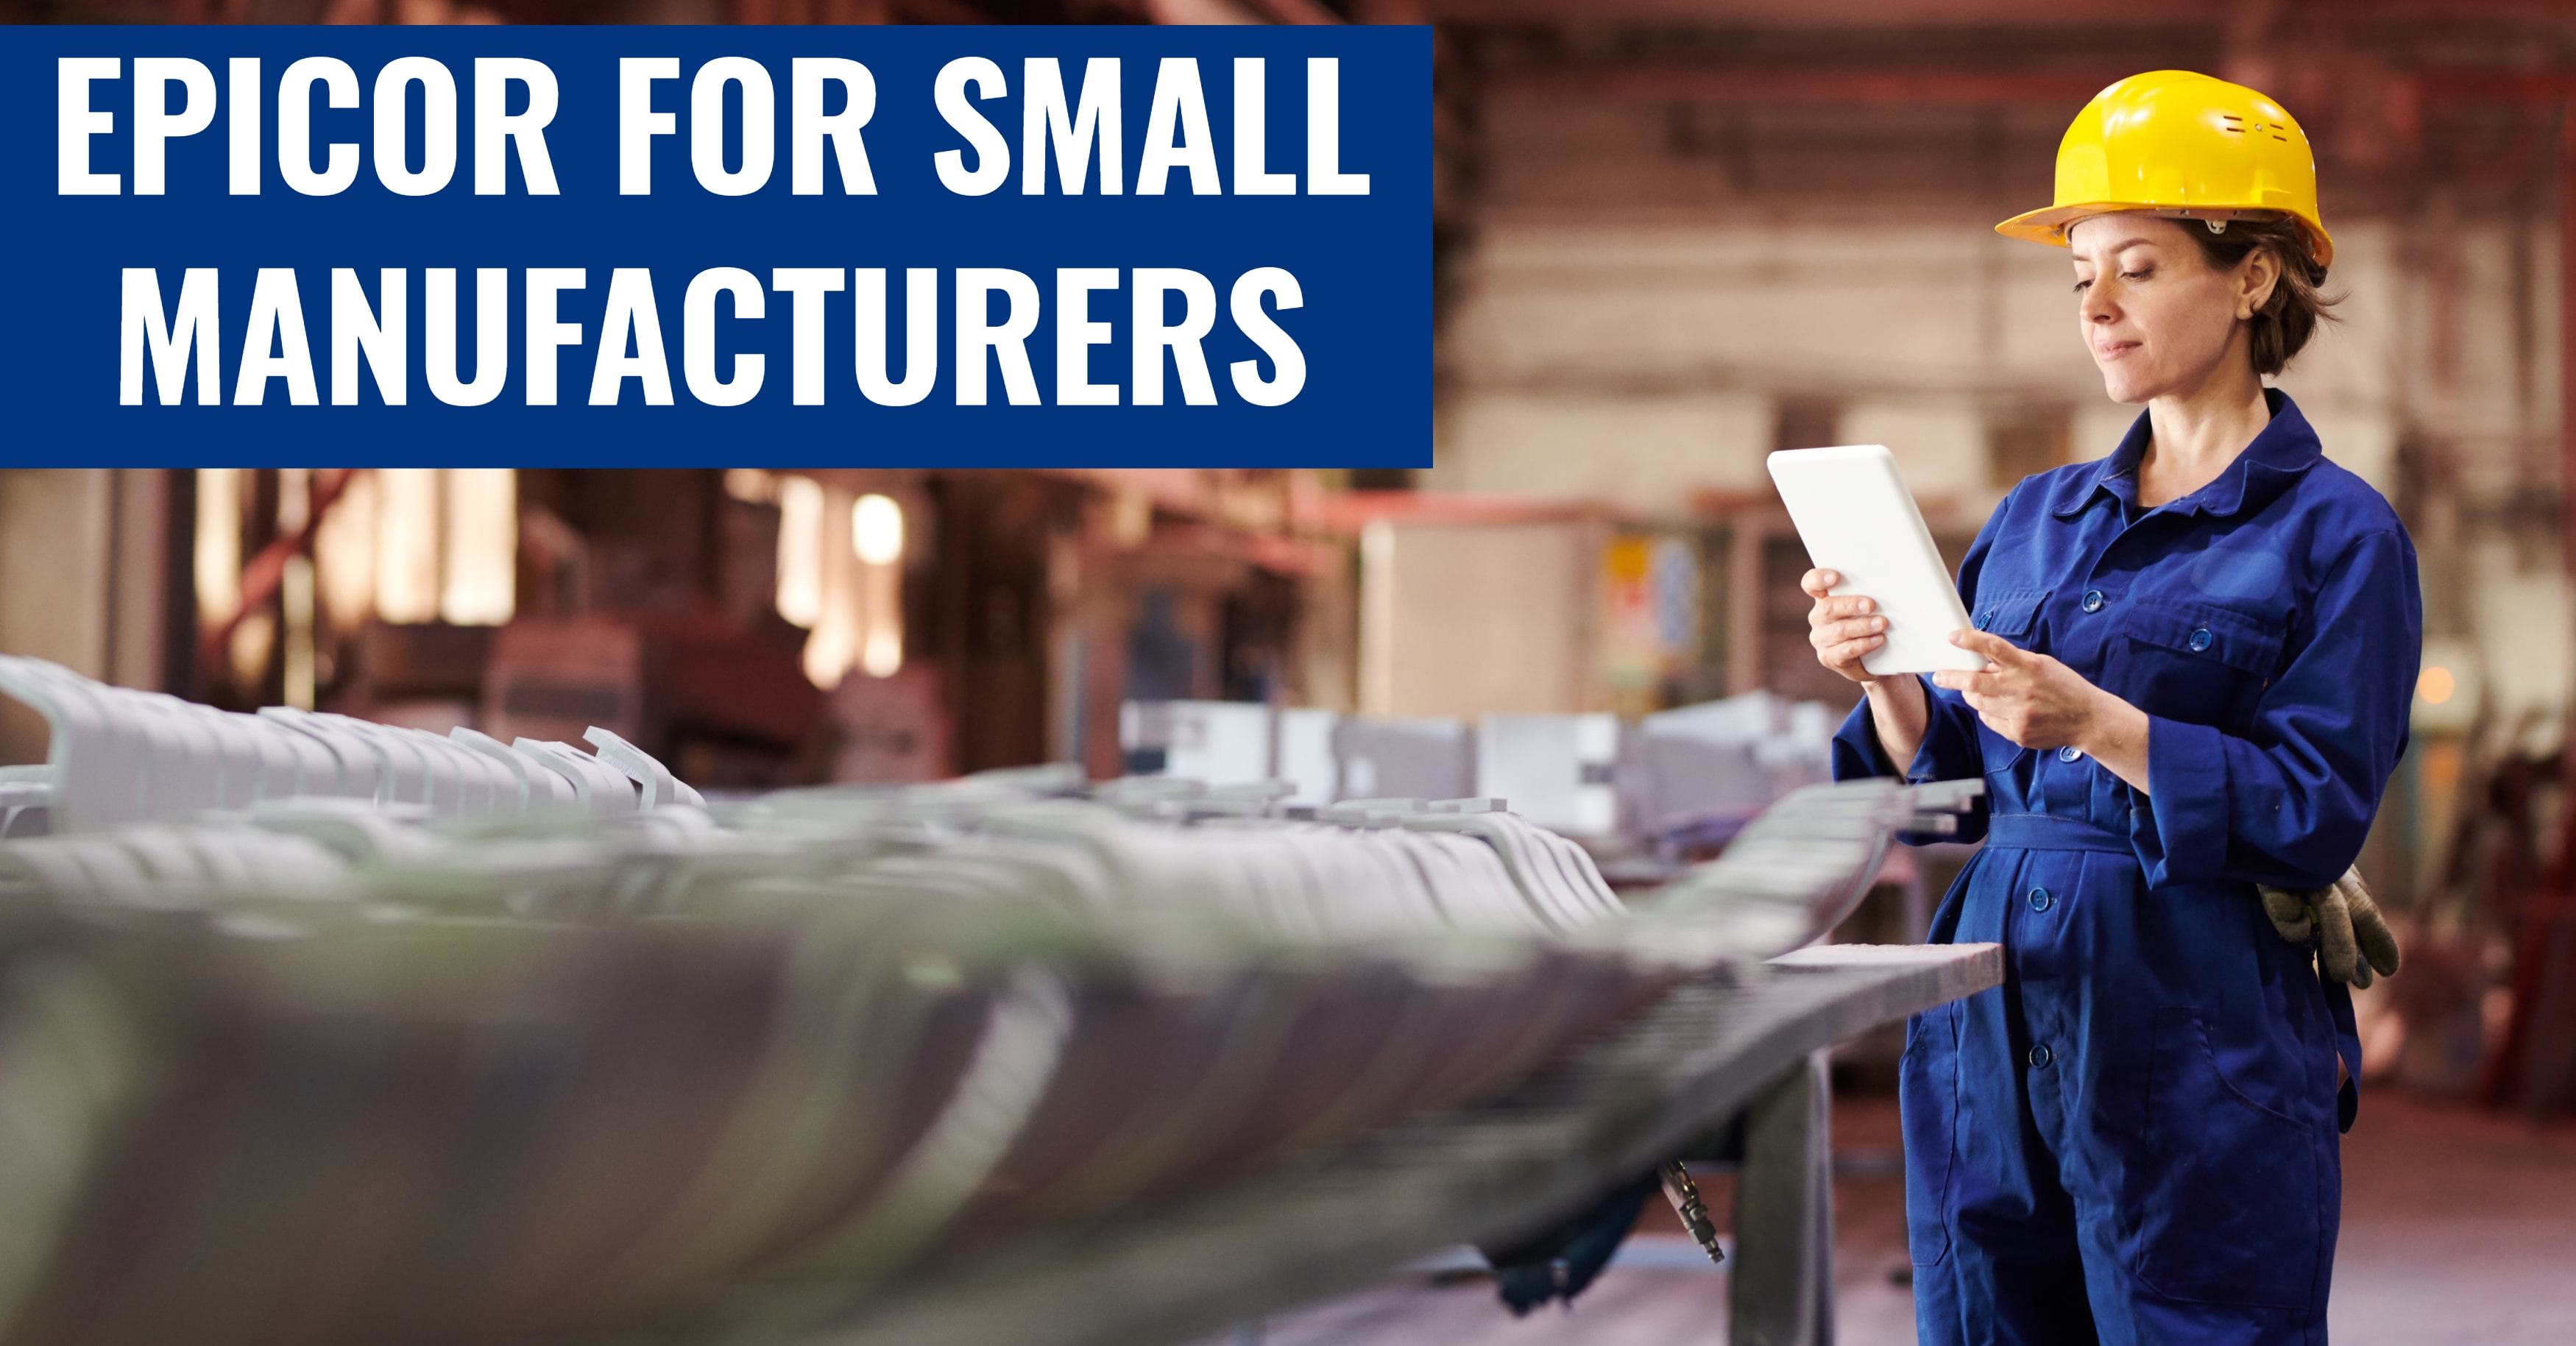 Epicor Small Manufacturing Software